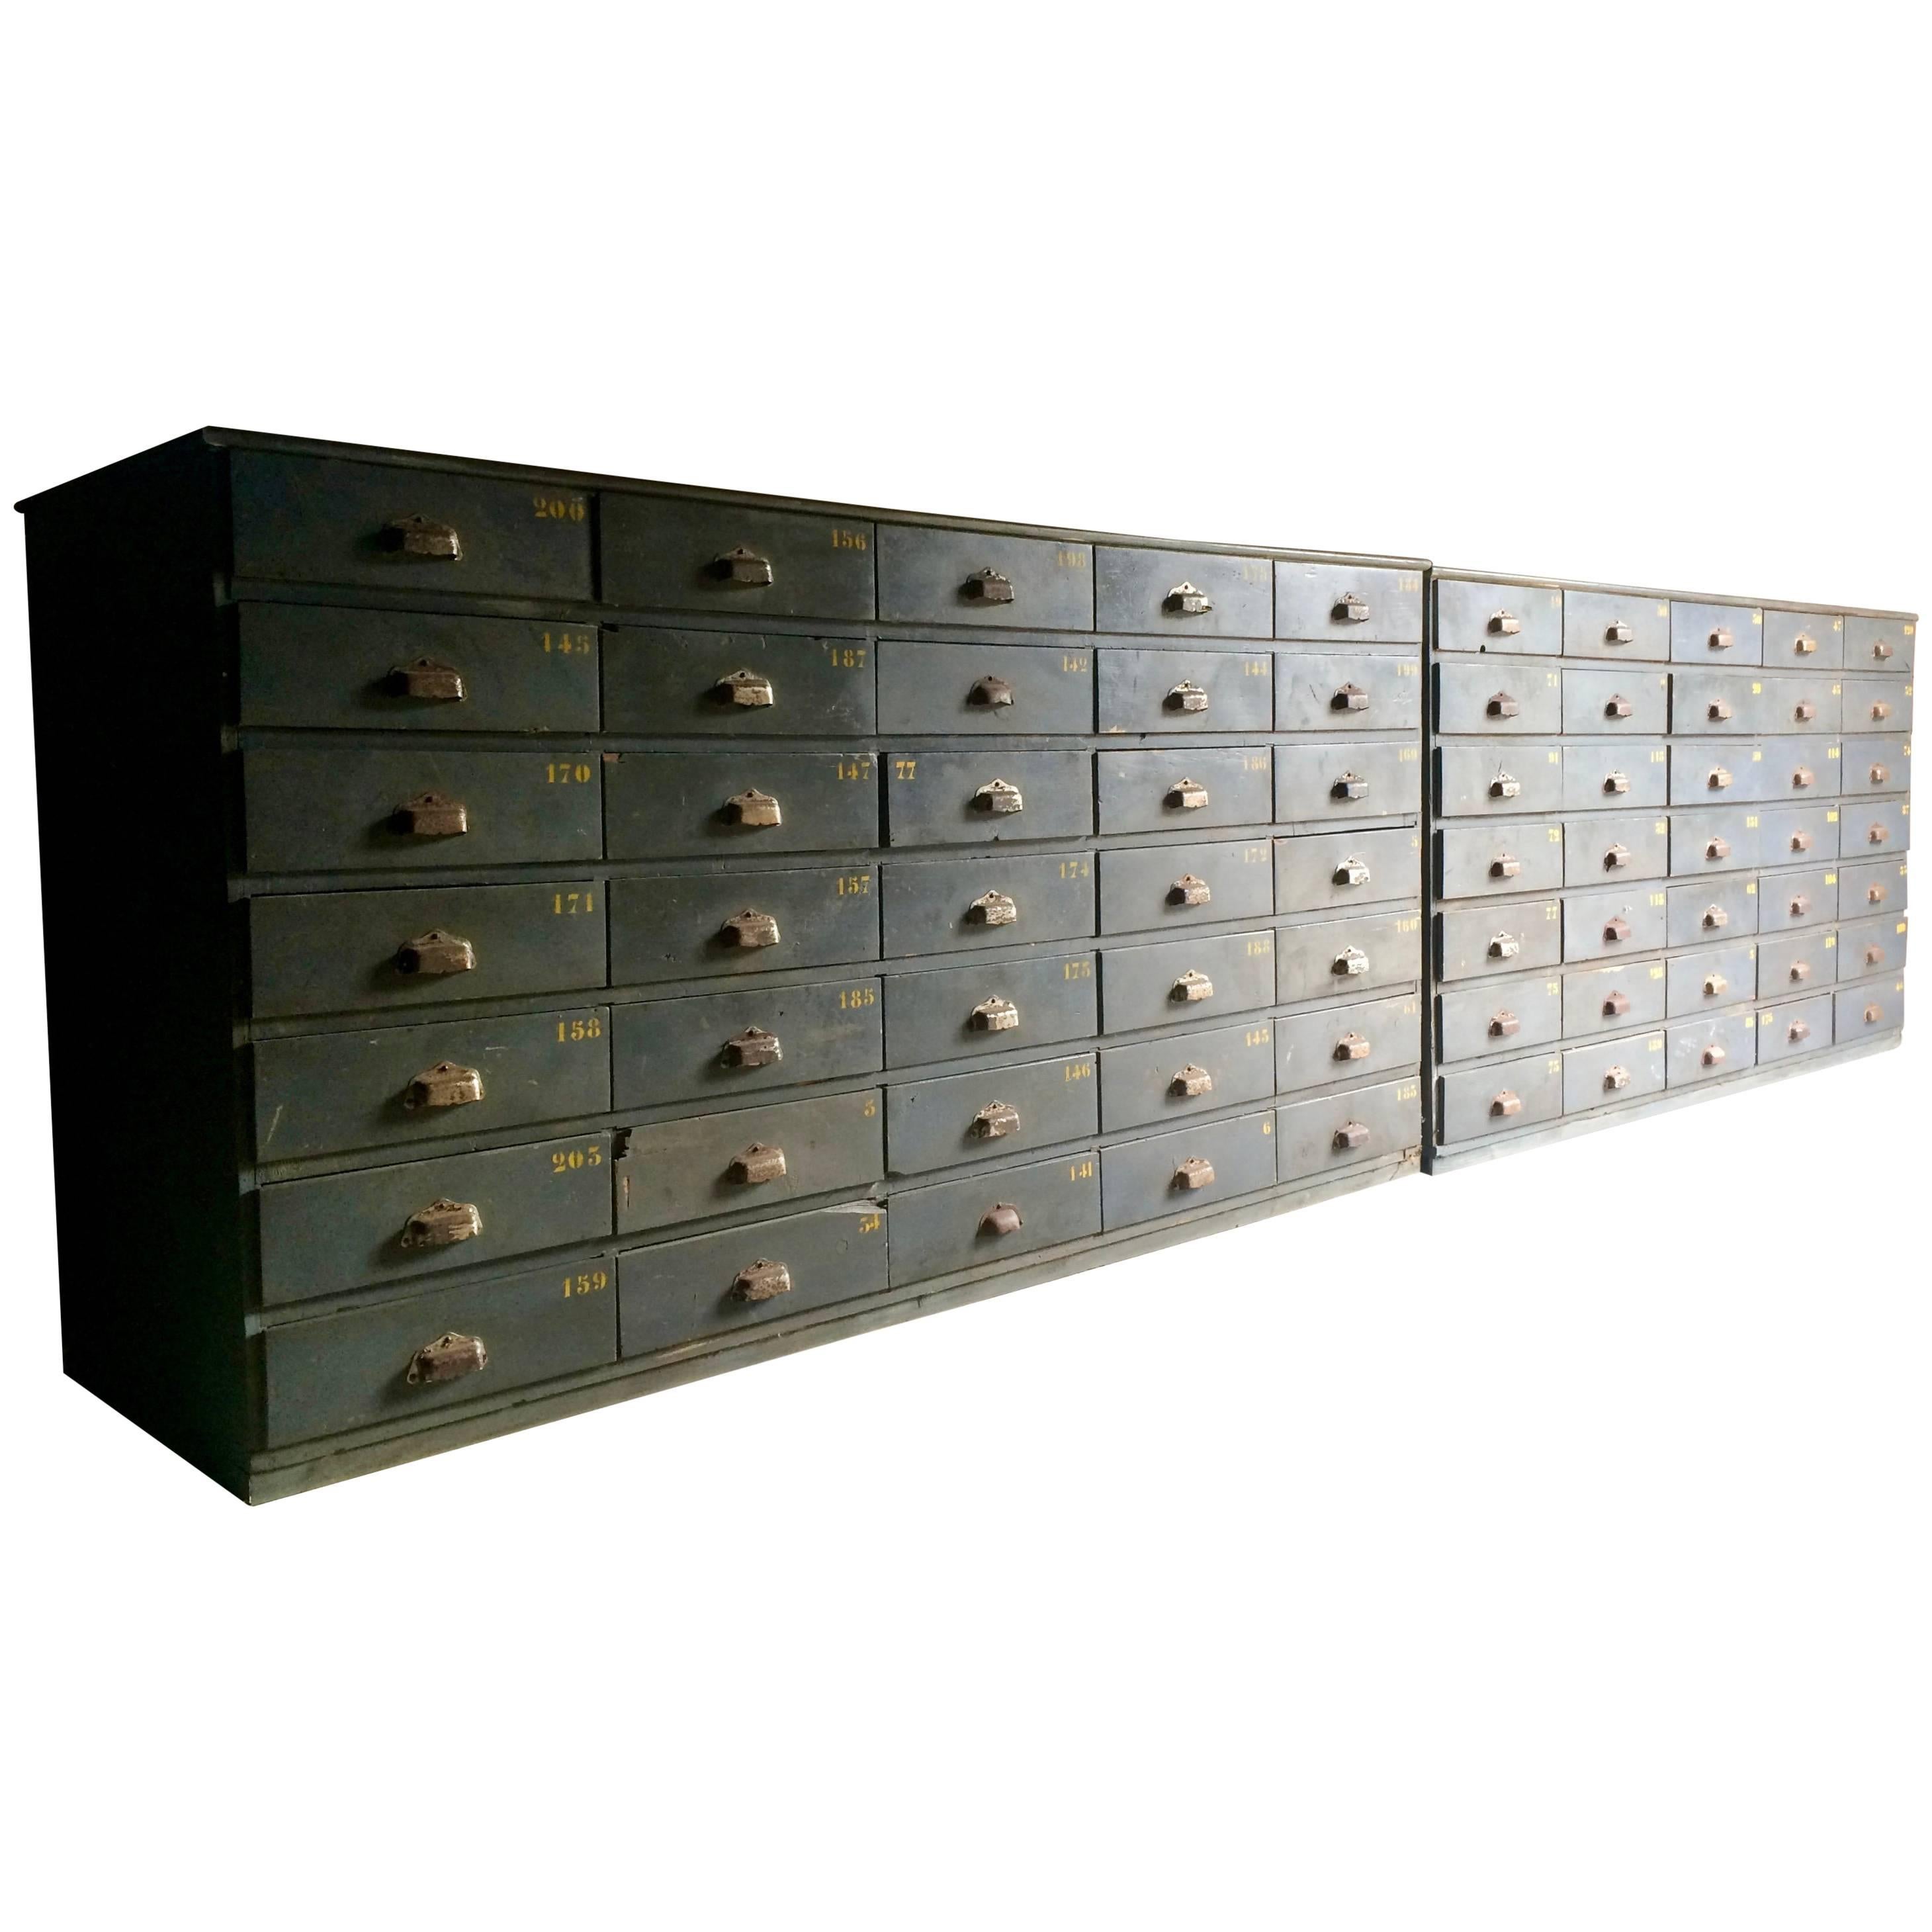 This fabulous antique engineers chests with a combined 70 drawers demonstrates beautifully the bygone Industrial era perfectly, ideal for todays 'Loft Style' living originally used in an Industrial workshop these chests would have housed components